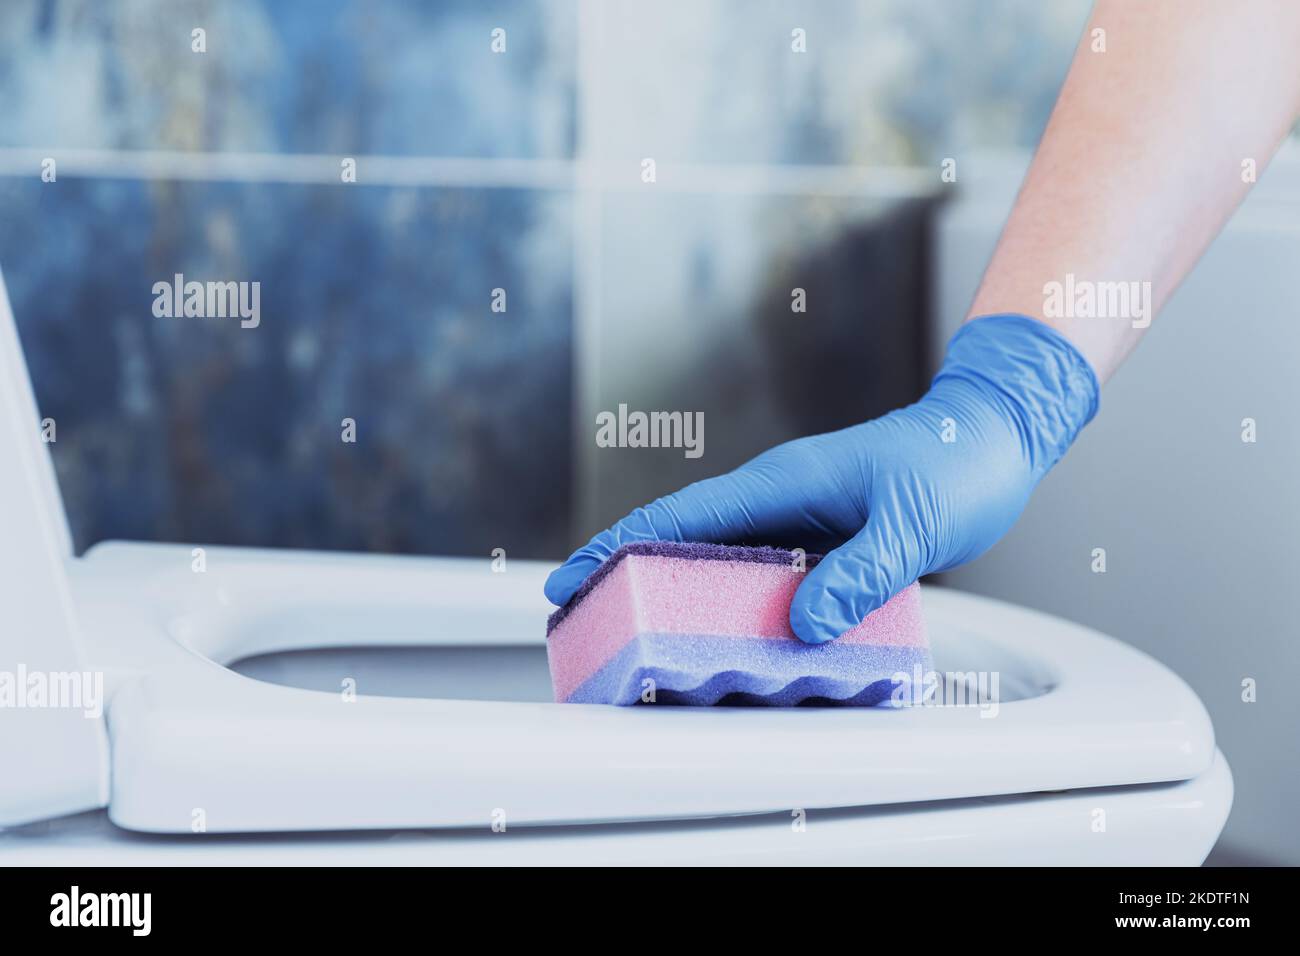 Cropped image view with close up on woman hands gloved in rubber protective gloves. Housewife cleaning toilet bowl, seat with pink sponge in bathroom or modern public restroom with blue grey tile Stock Photo